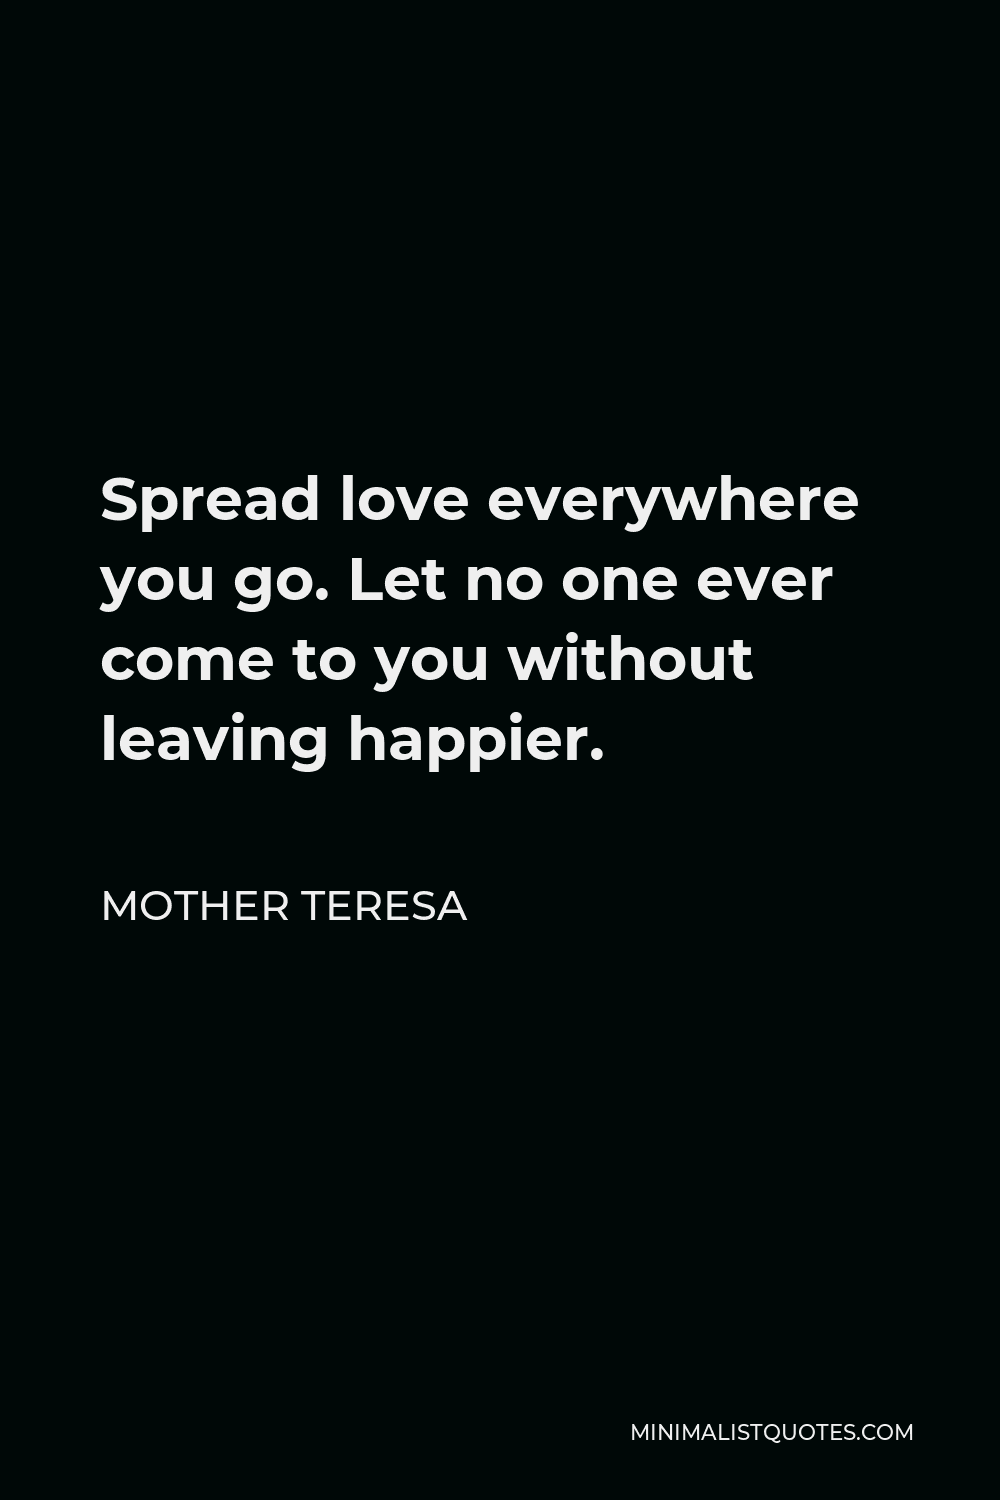 Mother Teresa Quote Spread Love Everywhere You Go Let No One Ever Come To You Without Leaving Happier